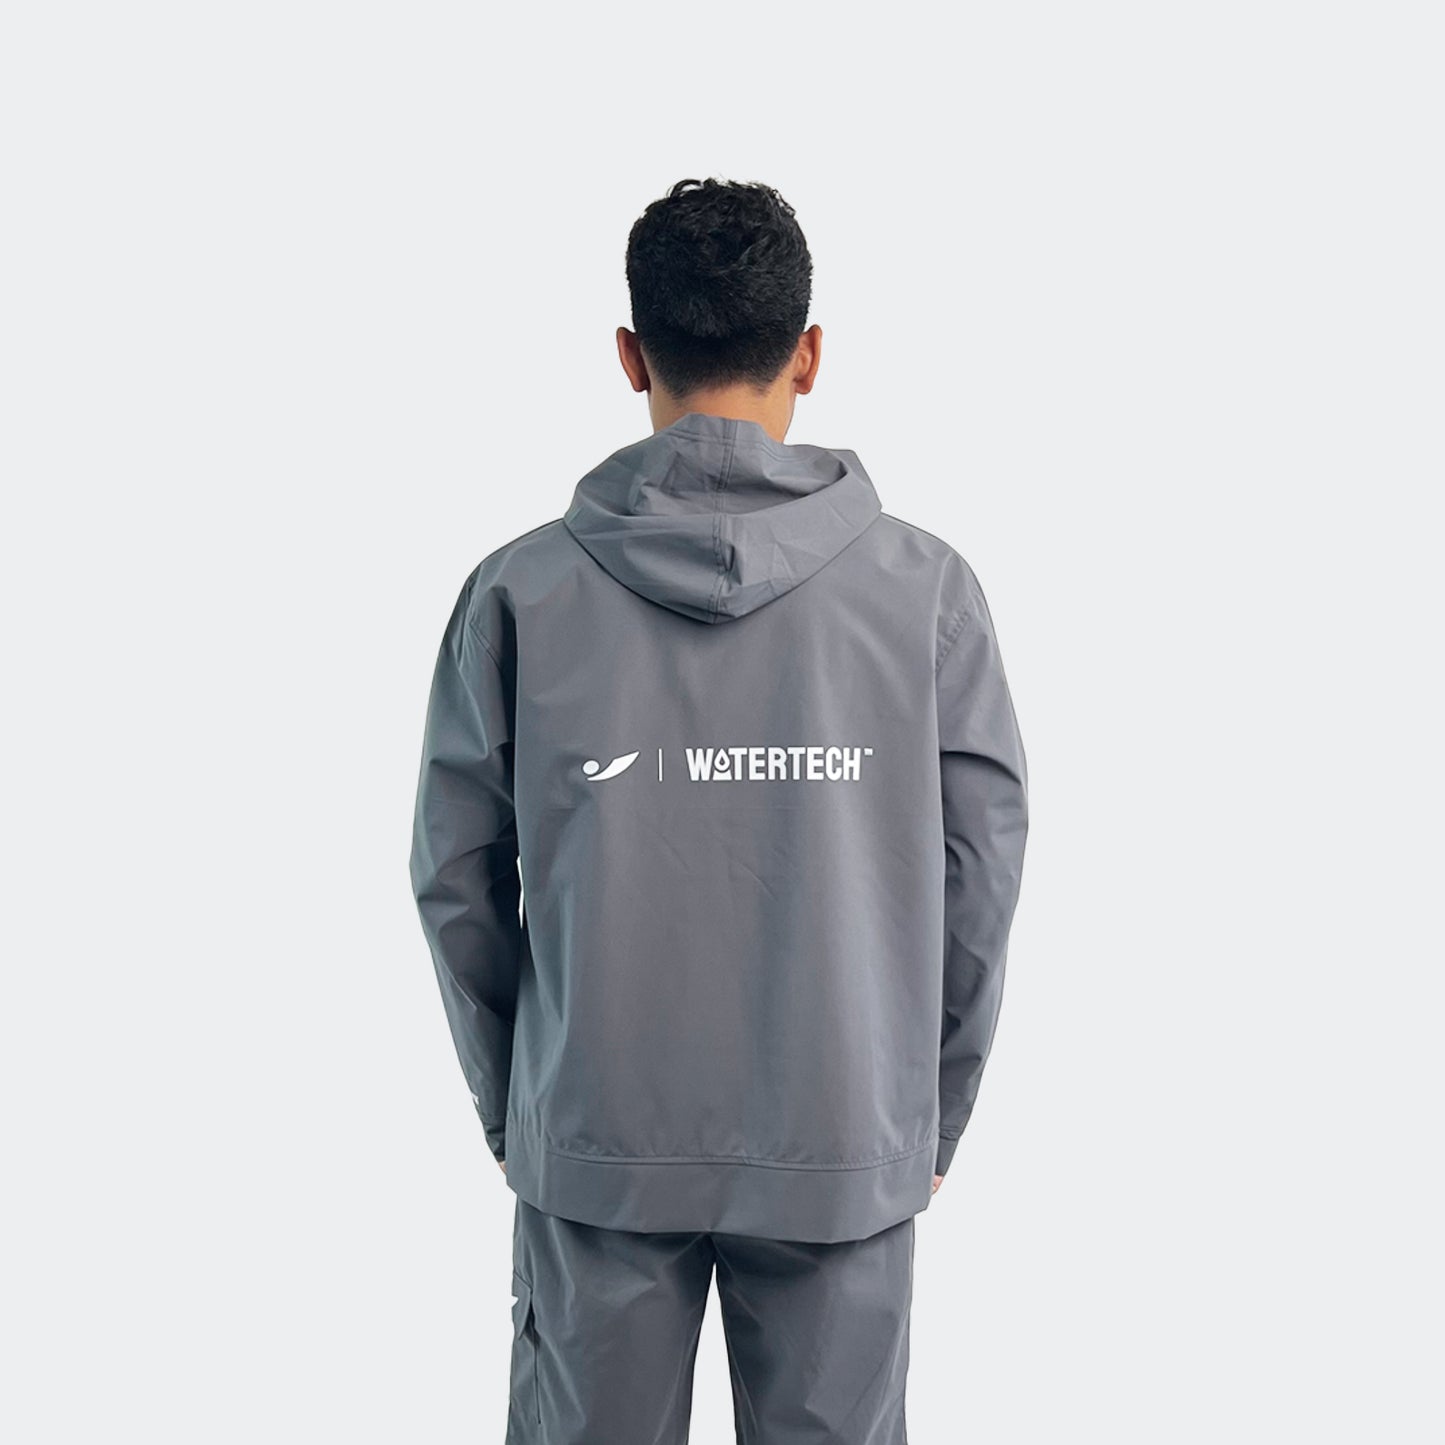 Watertech™ - Pullover Hoodie Training Jacket - Carbon Grey